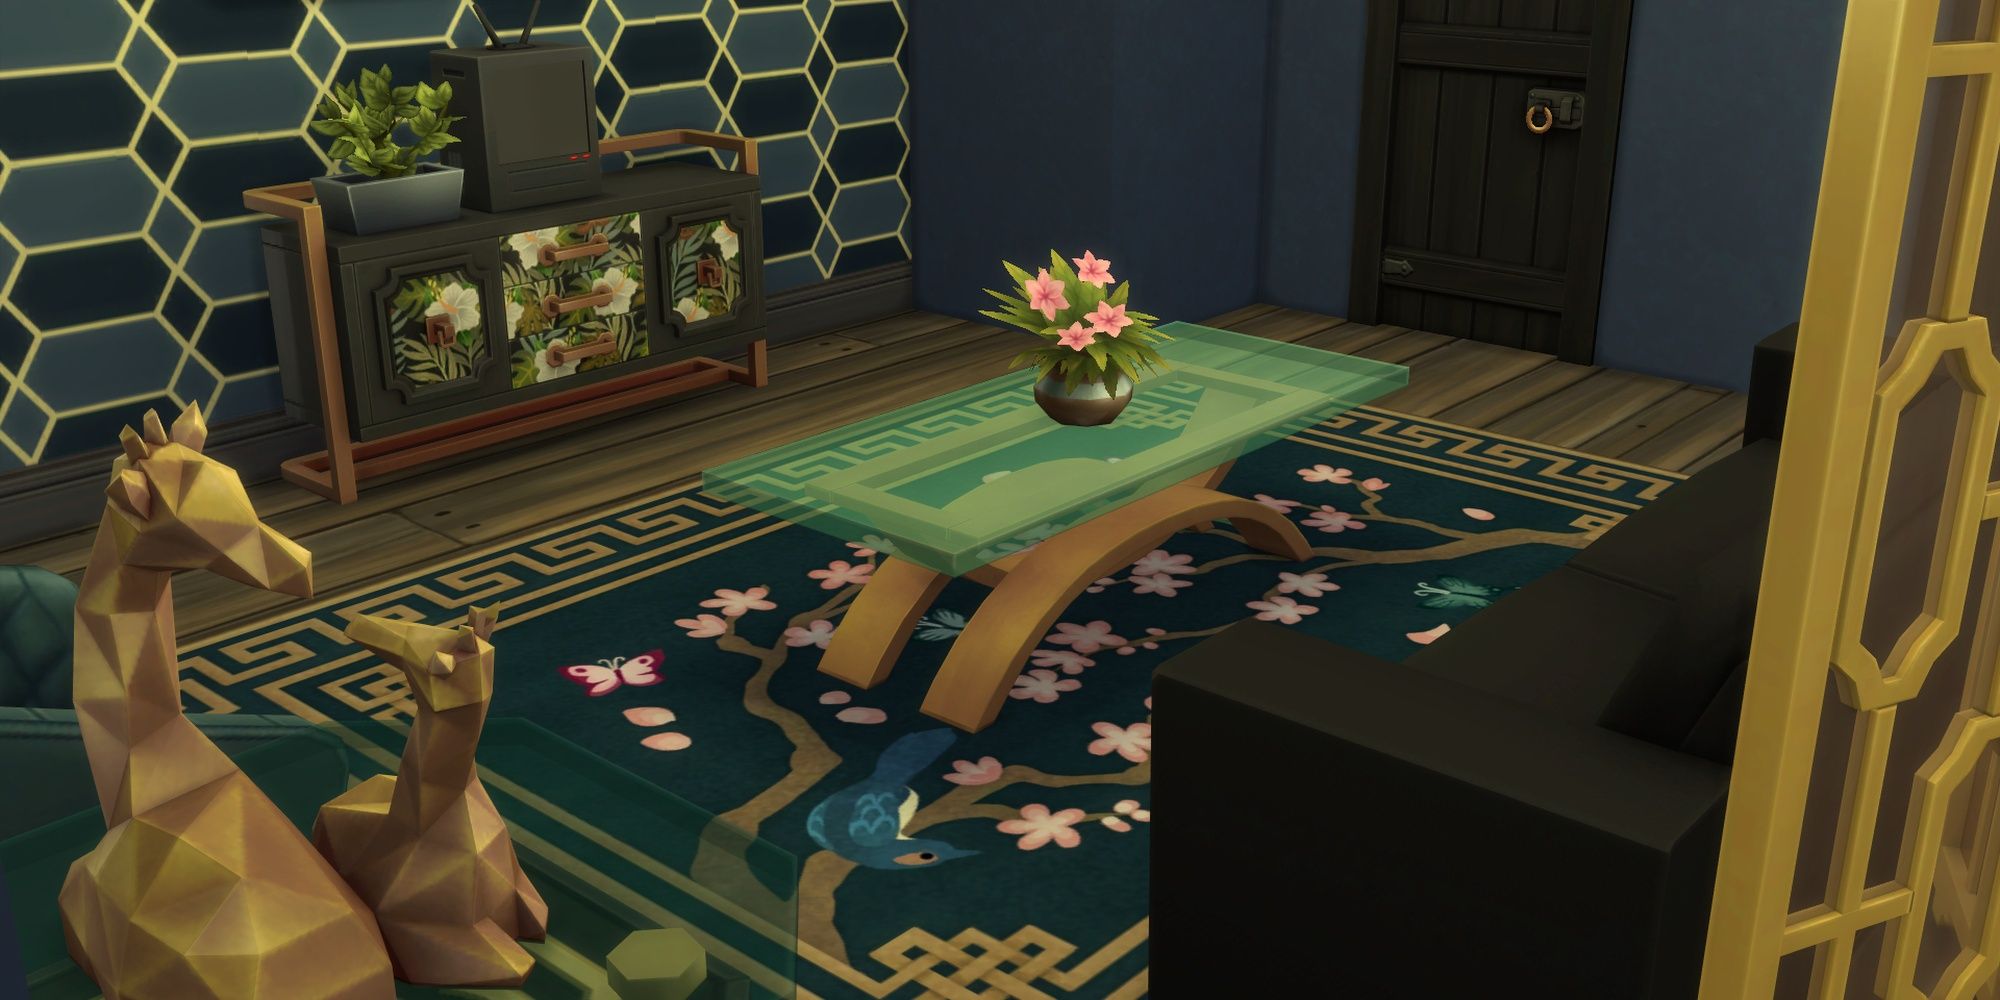 Plushly Bold Rug from The Sims 4: Decor to the Max